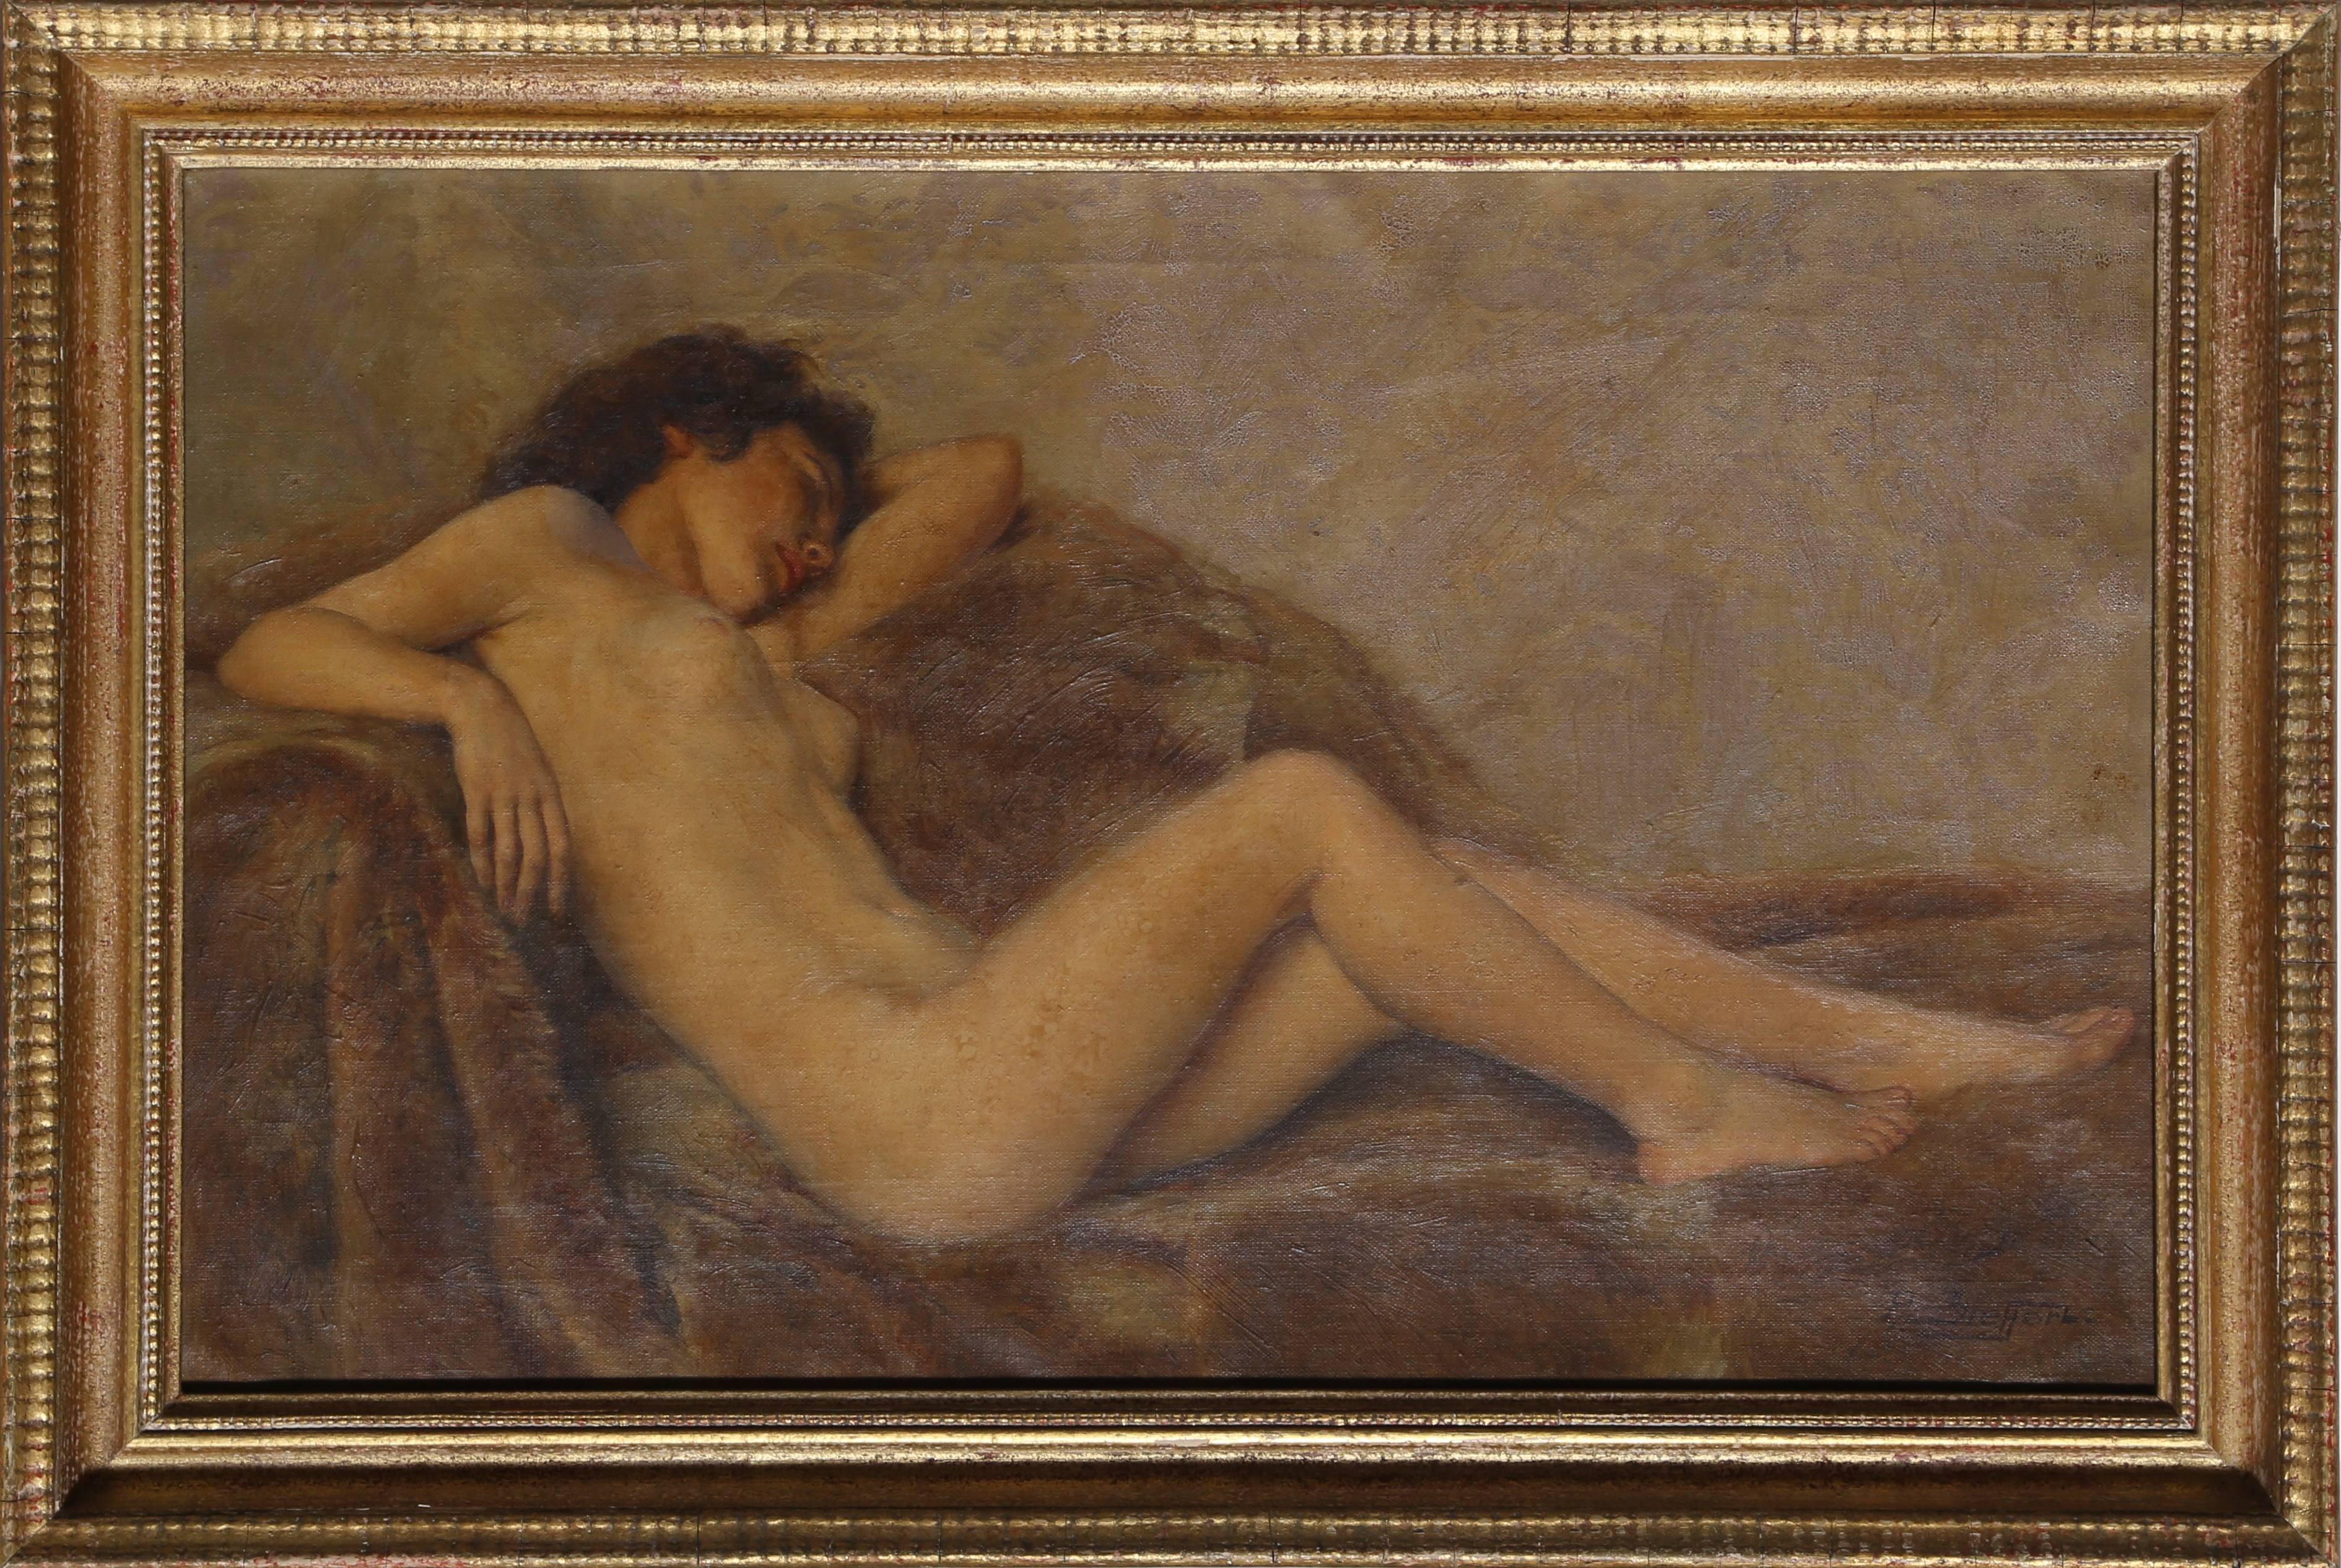 Liegesessel Nude